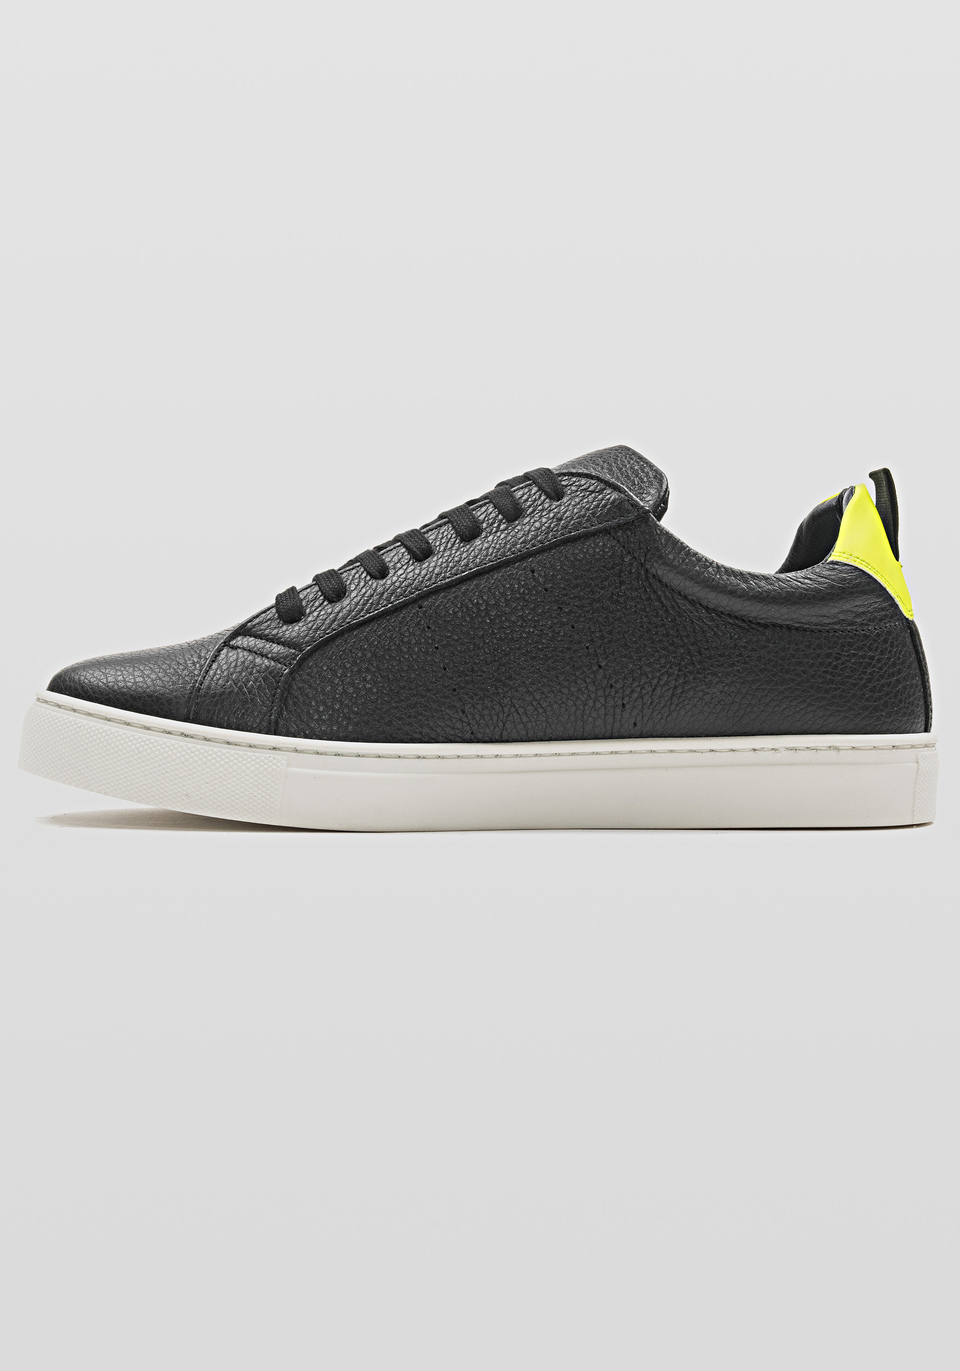 LOW-TOP SNEAKER IN SUPPLE TUMBLED LEATHER - Antony Morato Online Shop